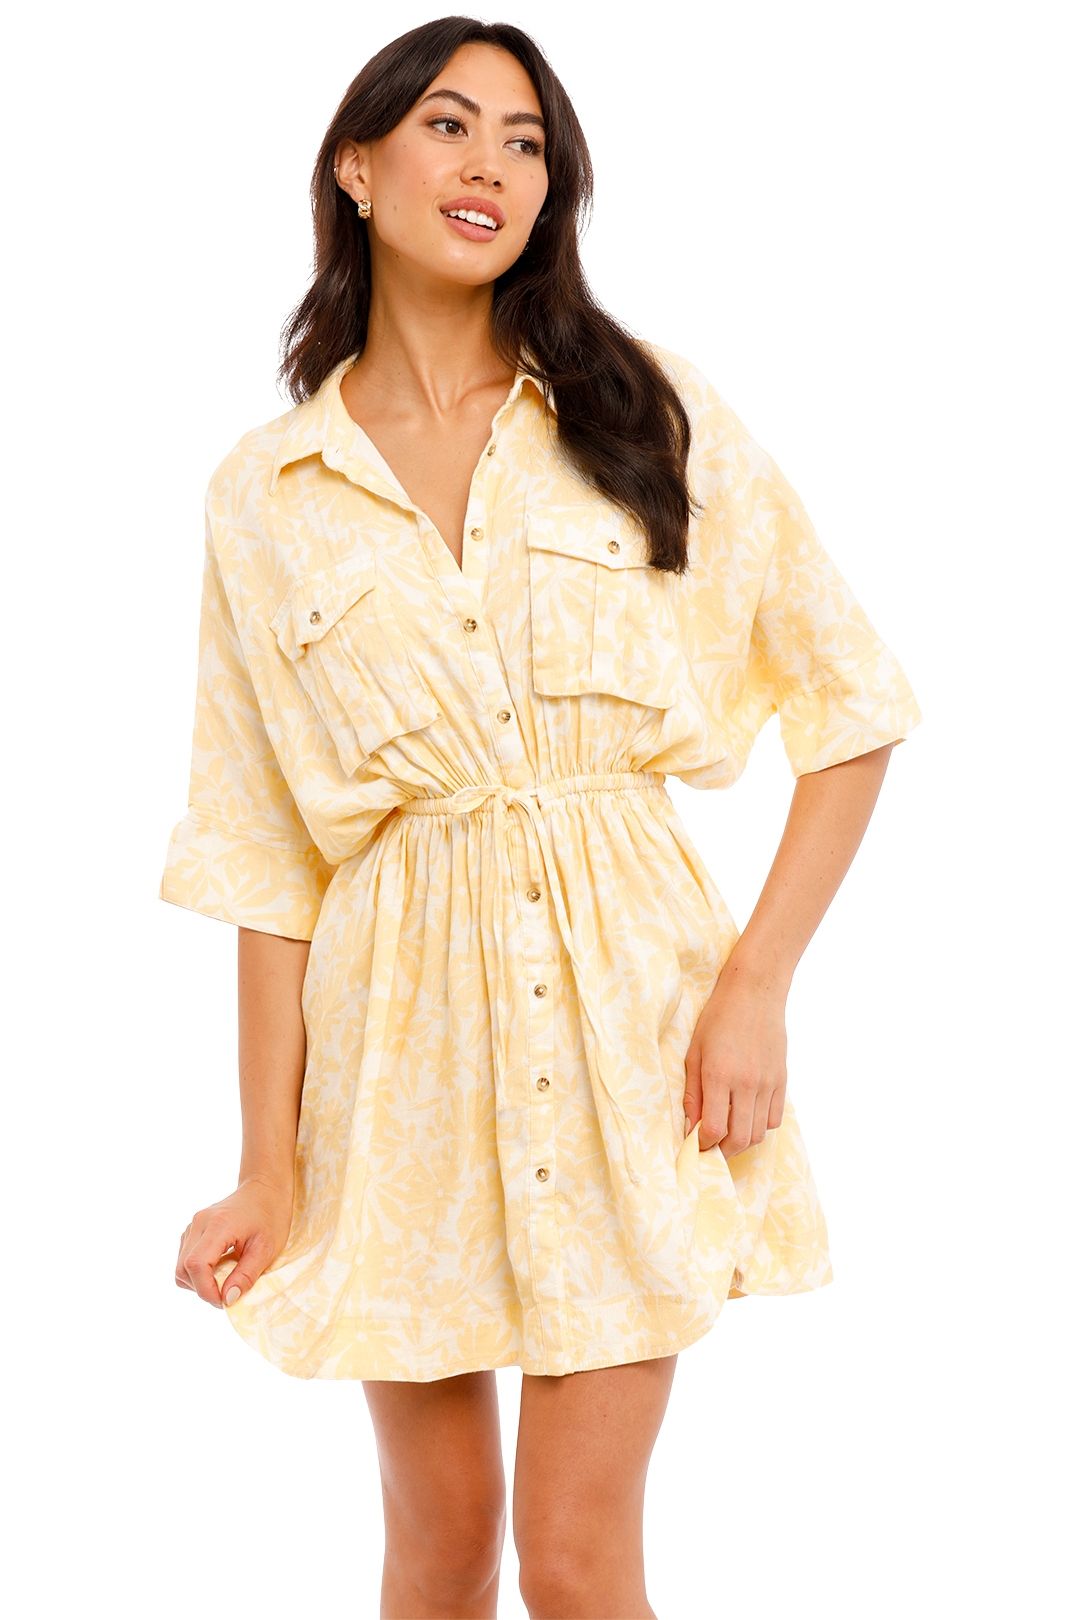 Dallas Dress in Yellow Apricot Daisy Significant Other yellow